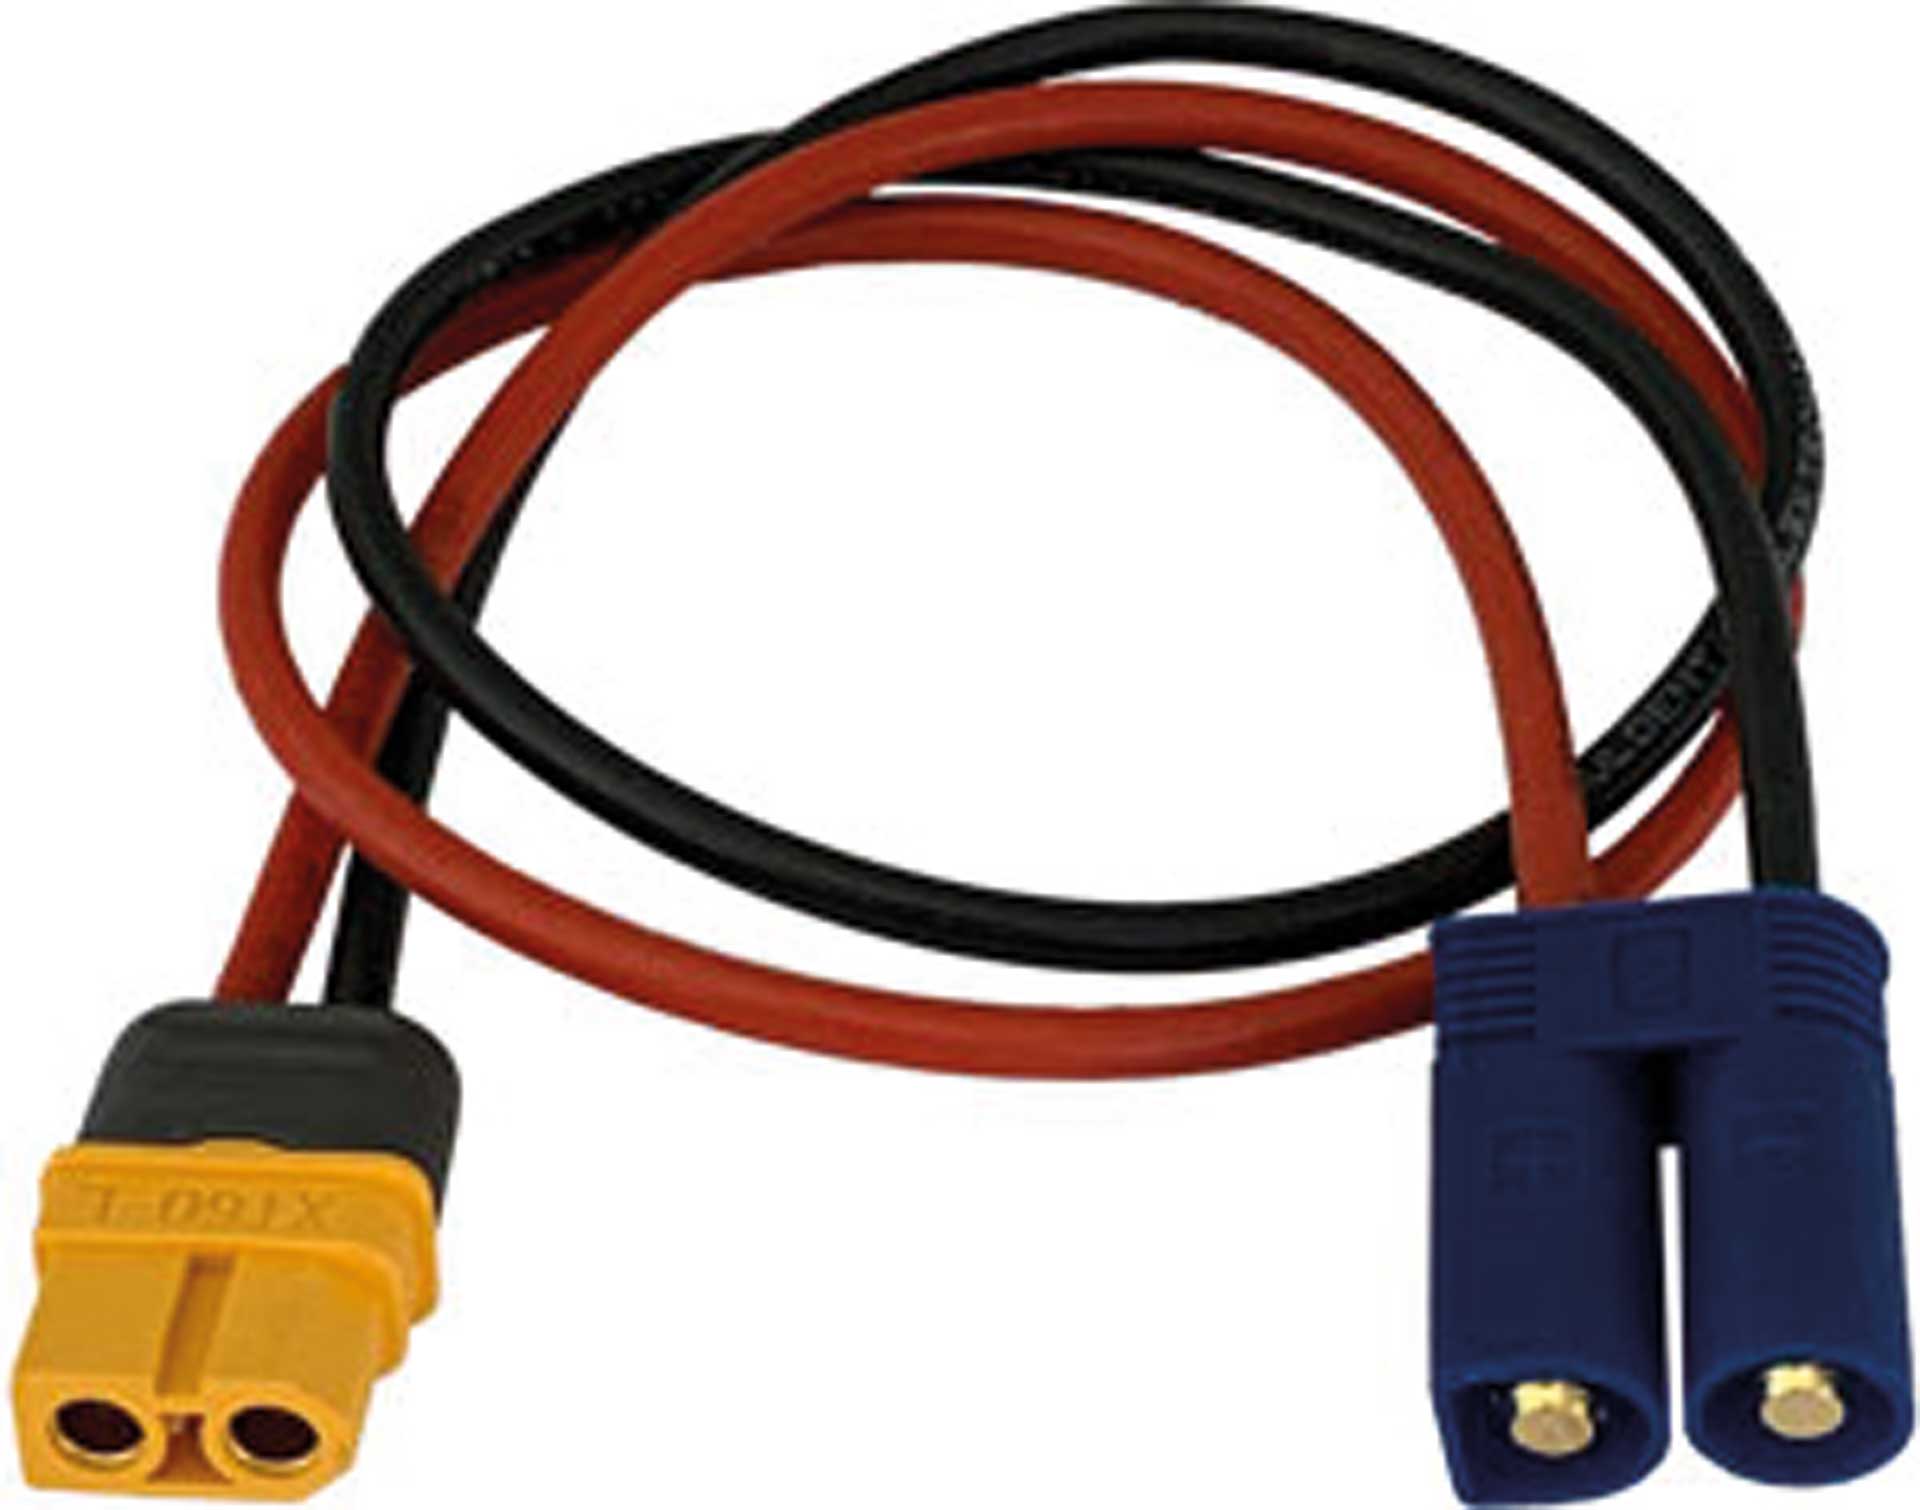 MULDENTAL XT-60 Charging cable for EC-5 Batteries